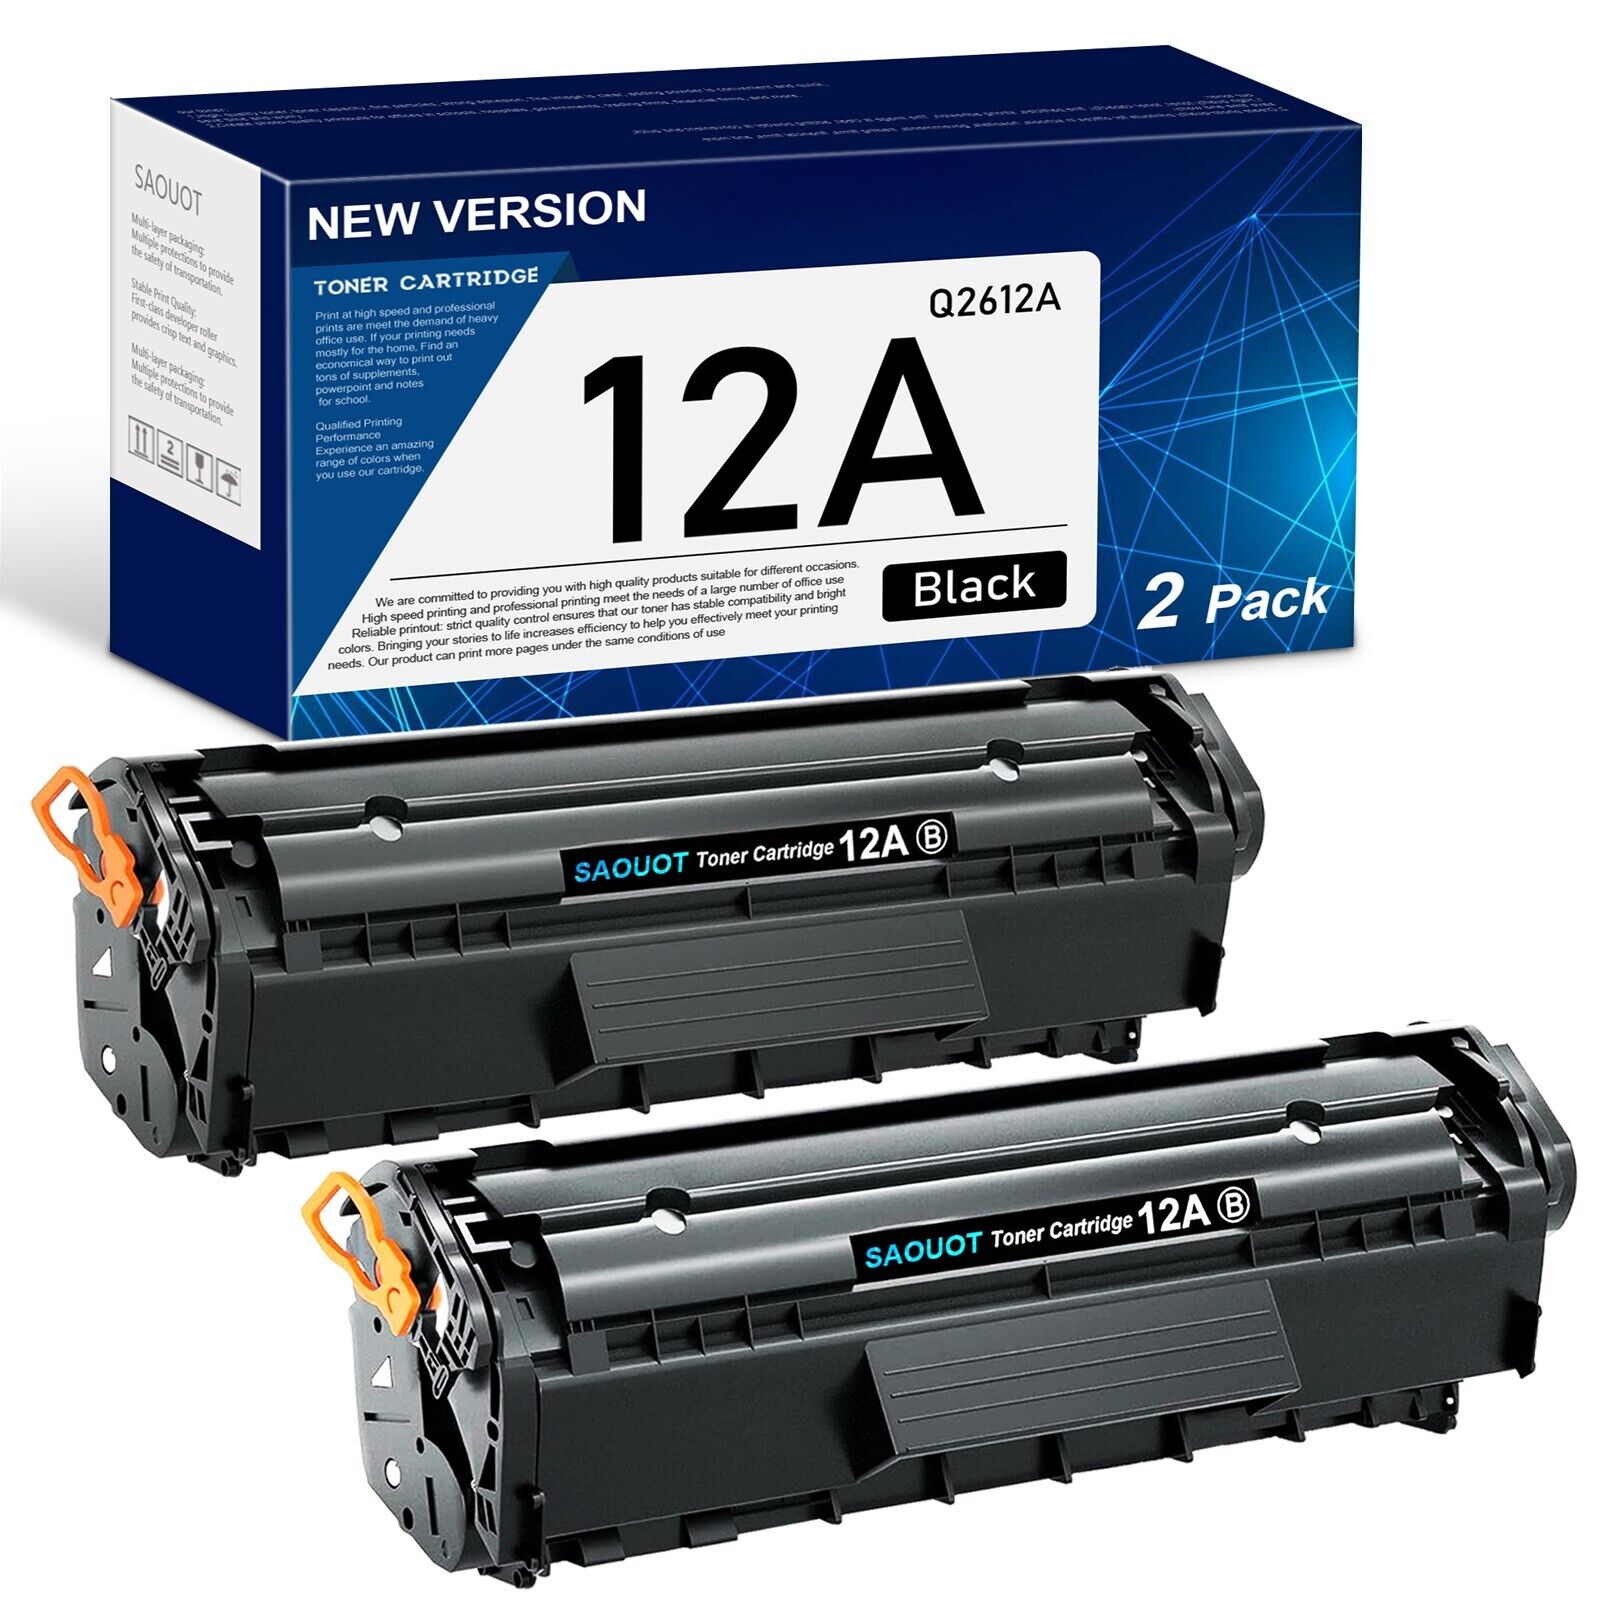 12A Toner Cartridge Replacement for HP 12A 1010 1020 3015, 2 Black | Q2612D